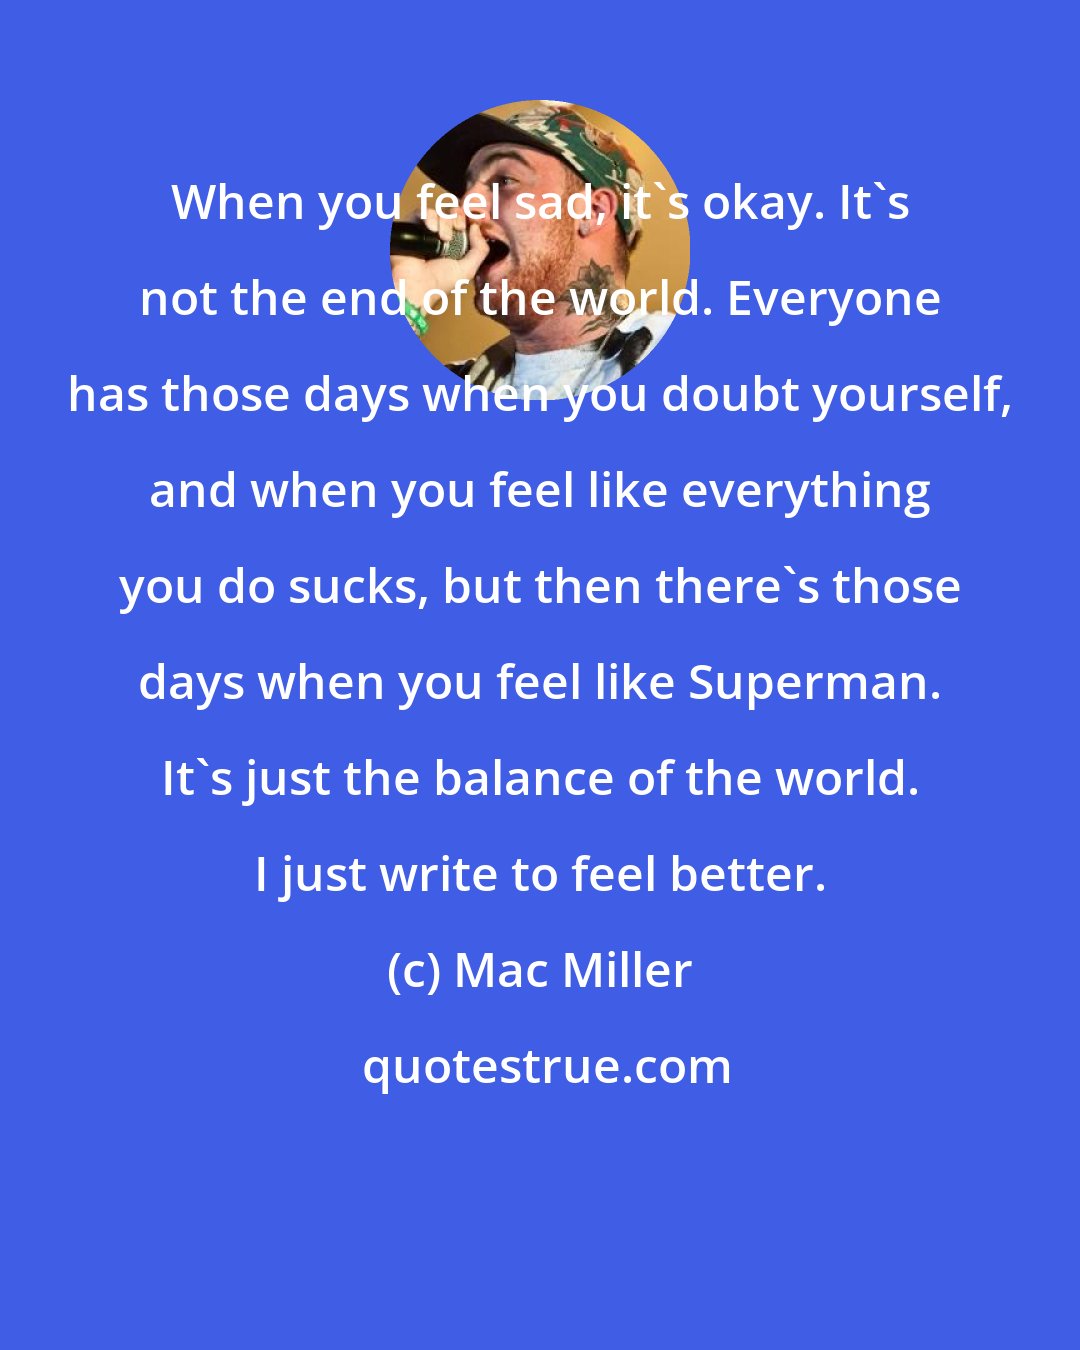 Mac Miller: When you feel sad, it's okay. It's not the end of the world. Everyone has those days when you doubt yourself, and when you feel like everything you do sucks, but then there's those days when you feel like Superman. It's just the balance of the world. I just write to feel better.